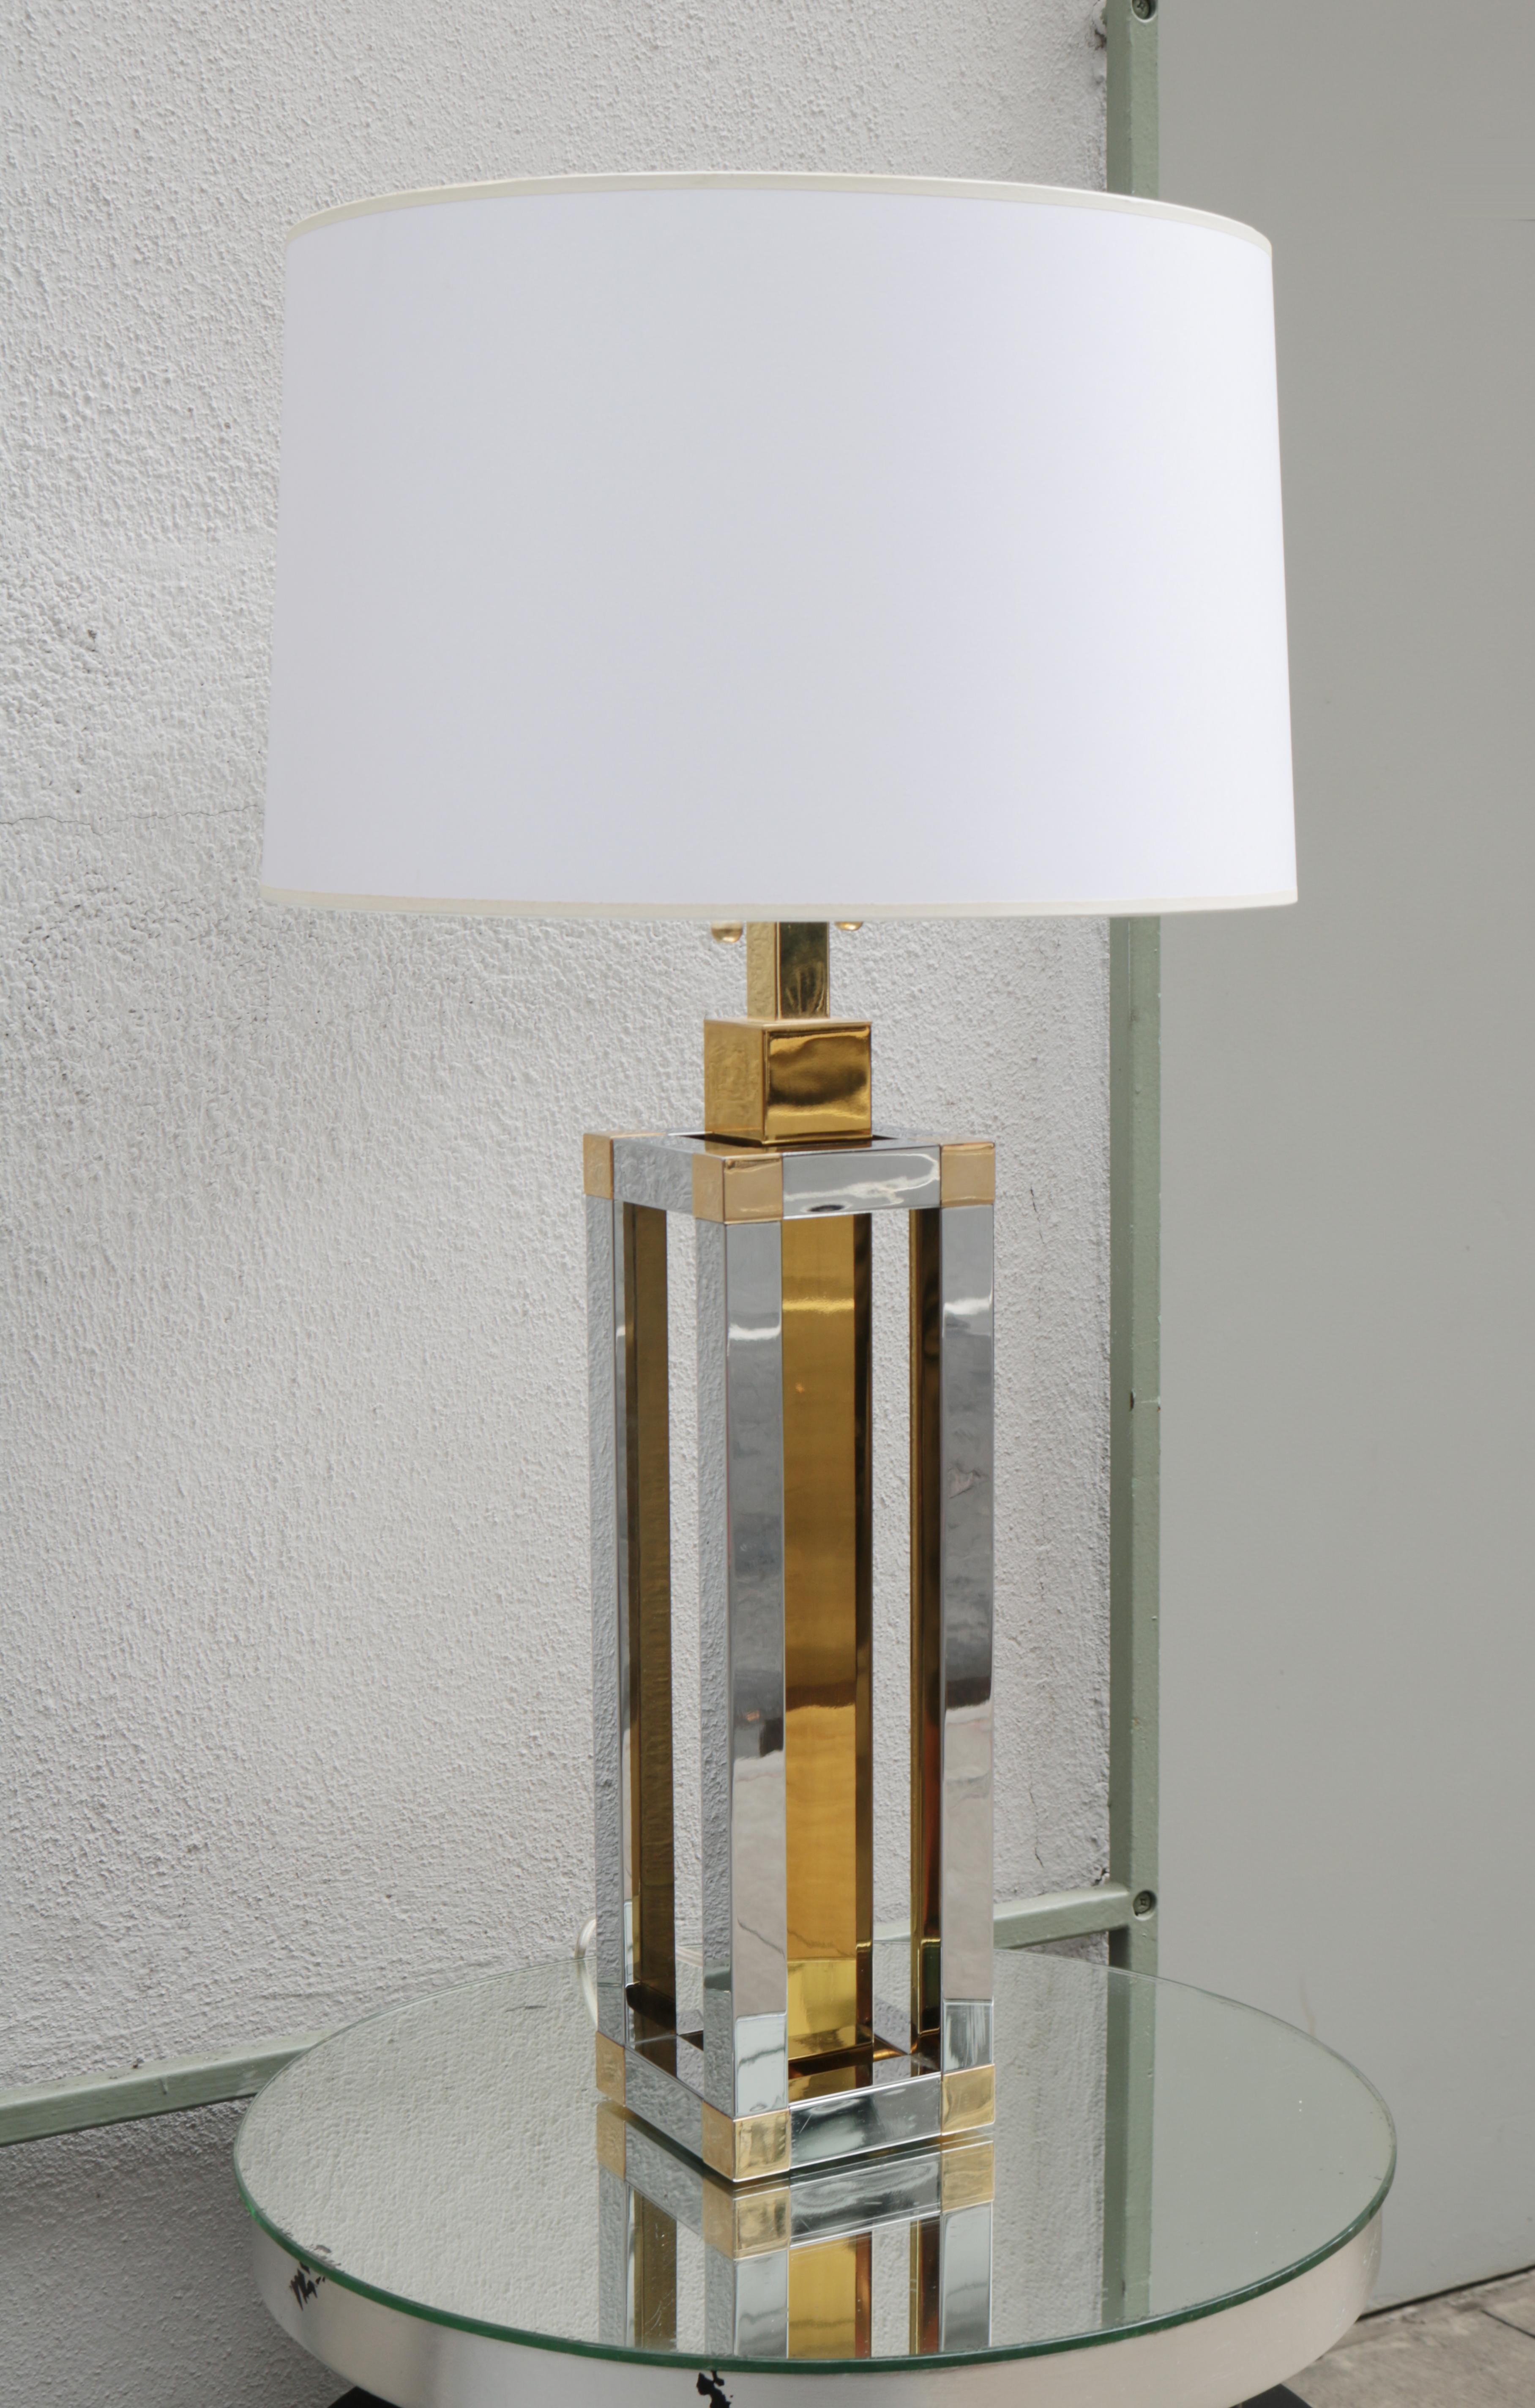 A Modernist table lamp designed by Stephane Davidts.
Geometric form in patinated brass and chrome.